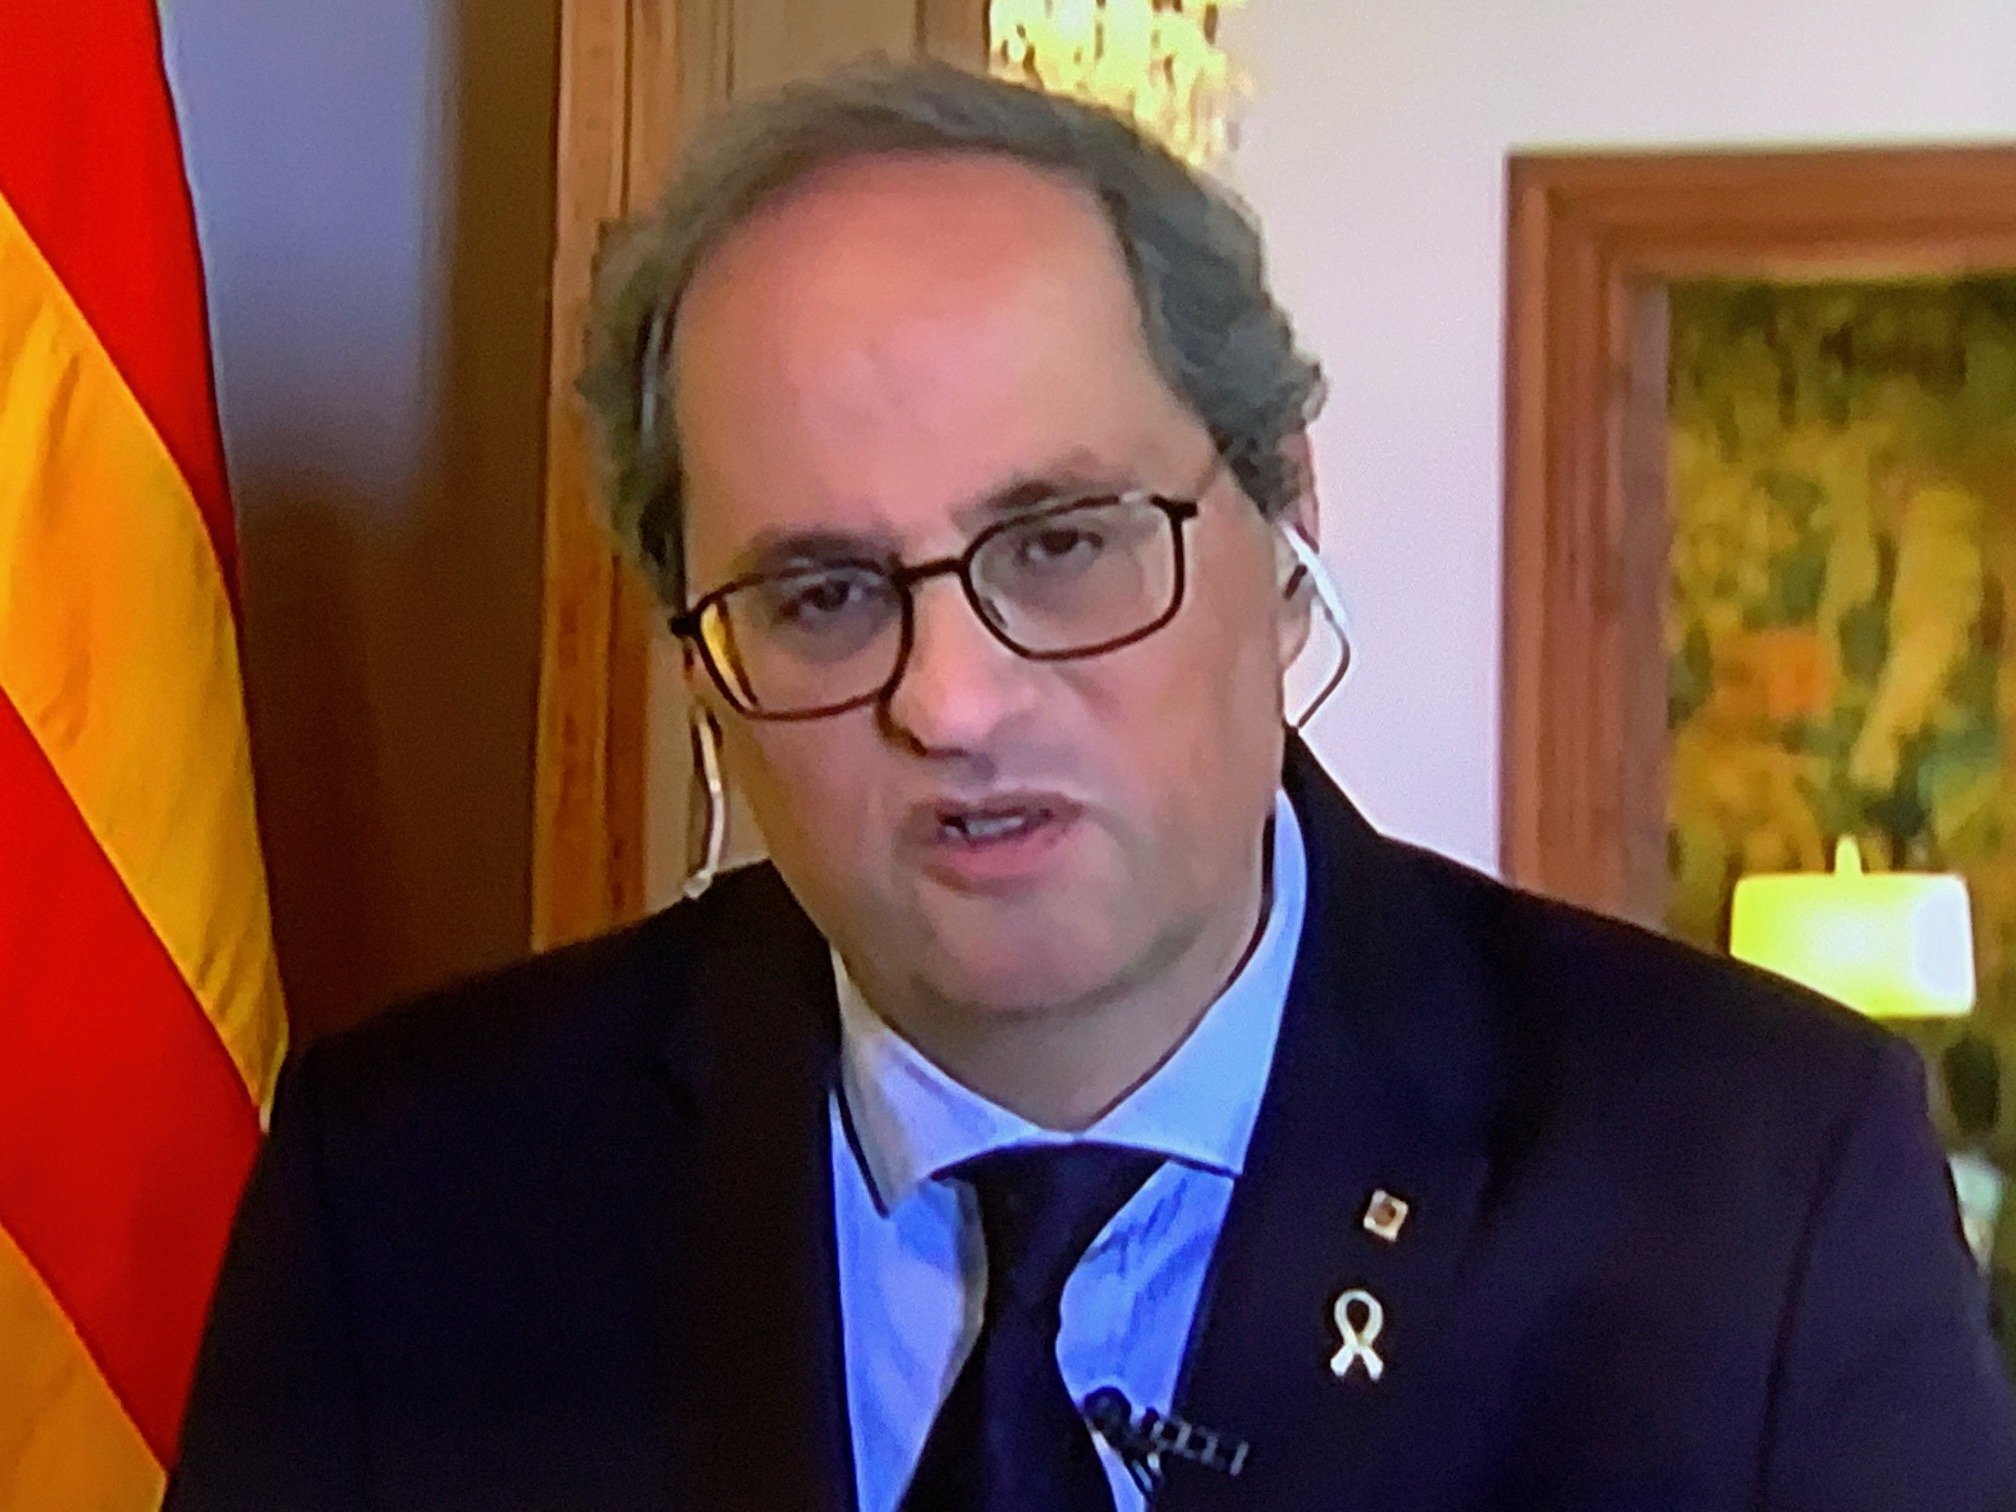 Coronavirus | Torra says manslaughter accusation against him is "an infamy"